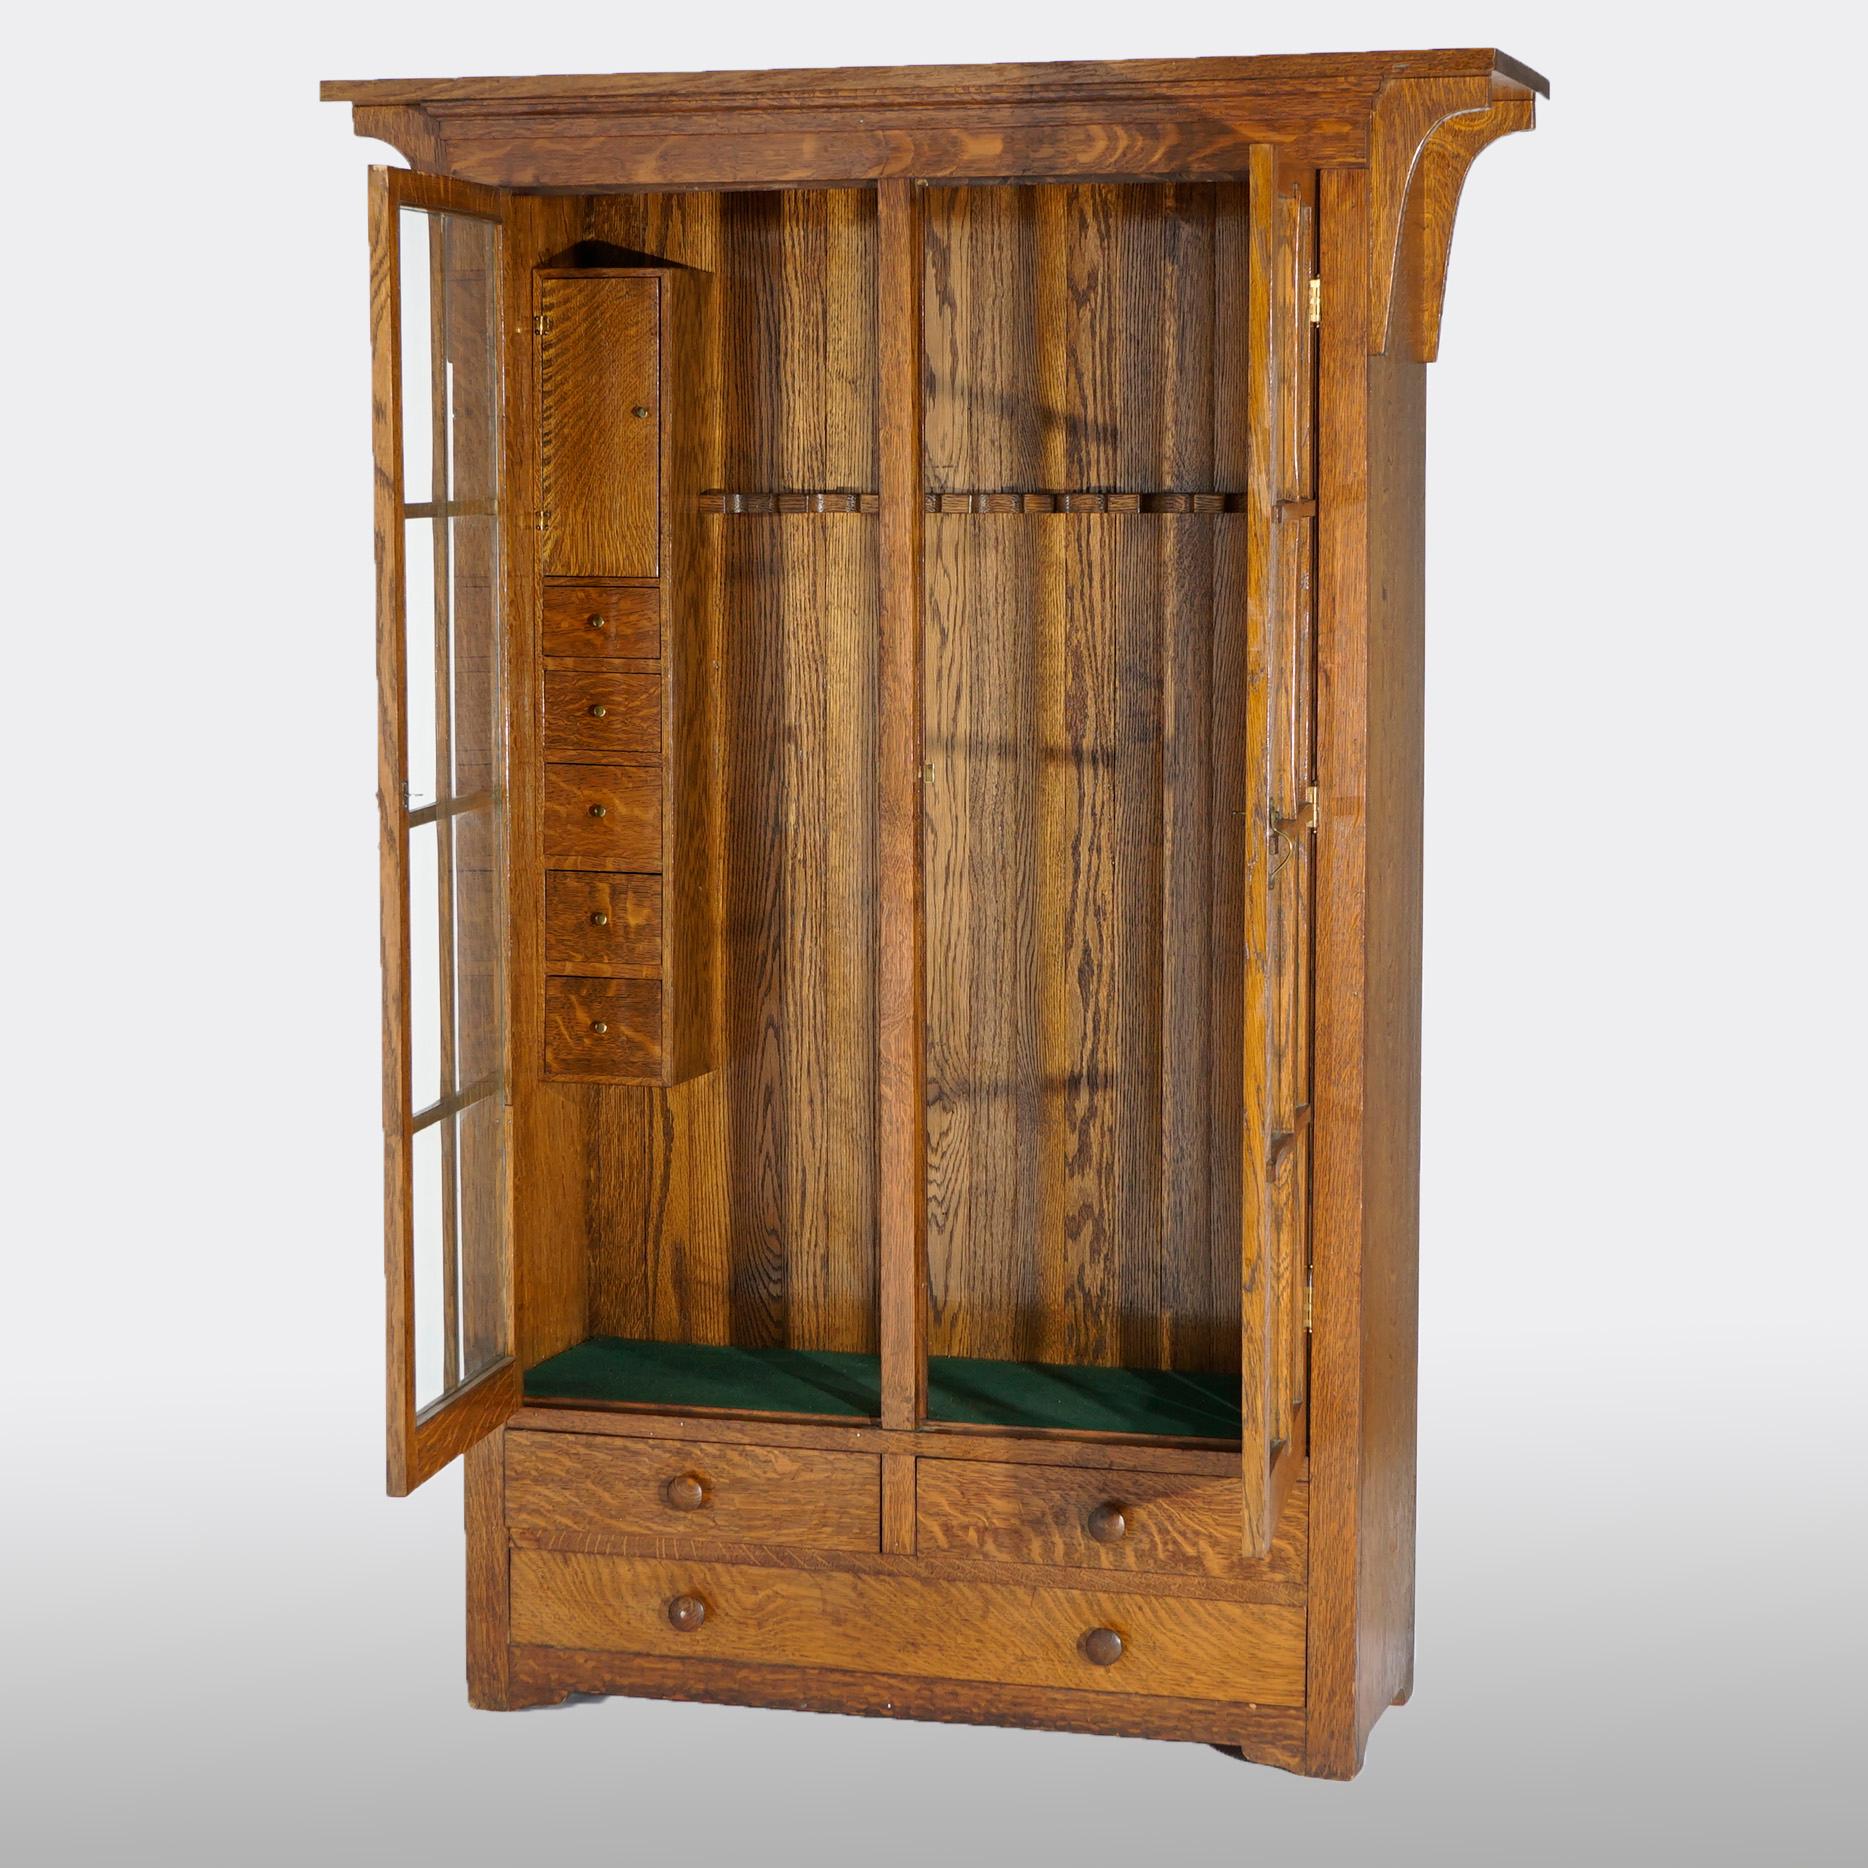 An antique arts & Crafts custom-made gun cabinet in the manner of Stickley offers quarter sawn oak construction with double glass doors opening to display interior with drawers, over base with two smaller drawers over single long drawer, craftsman